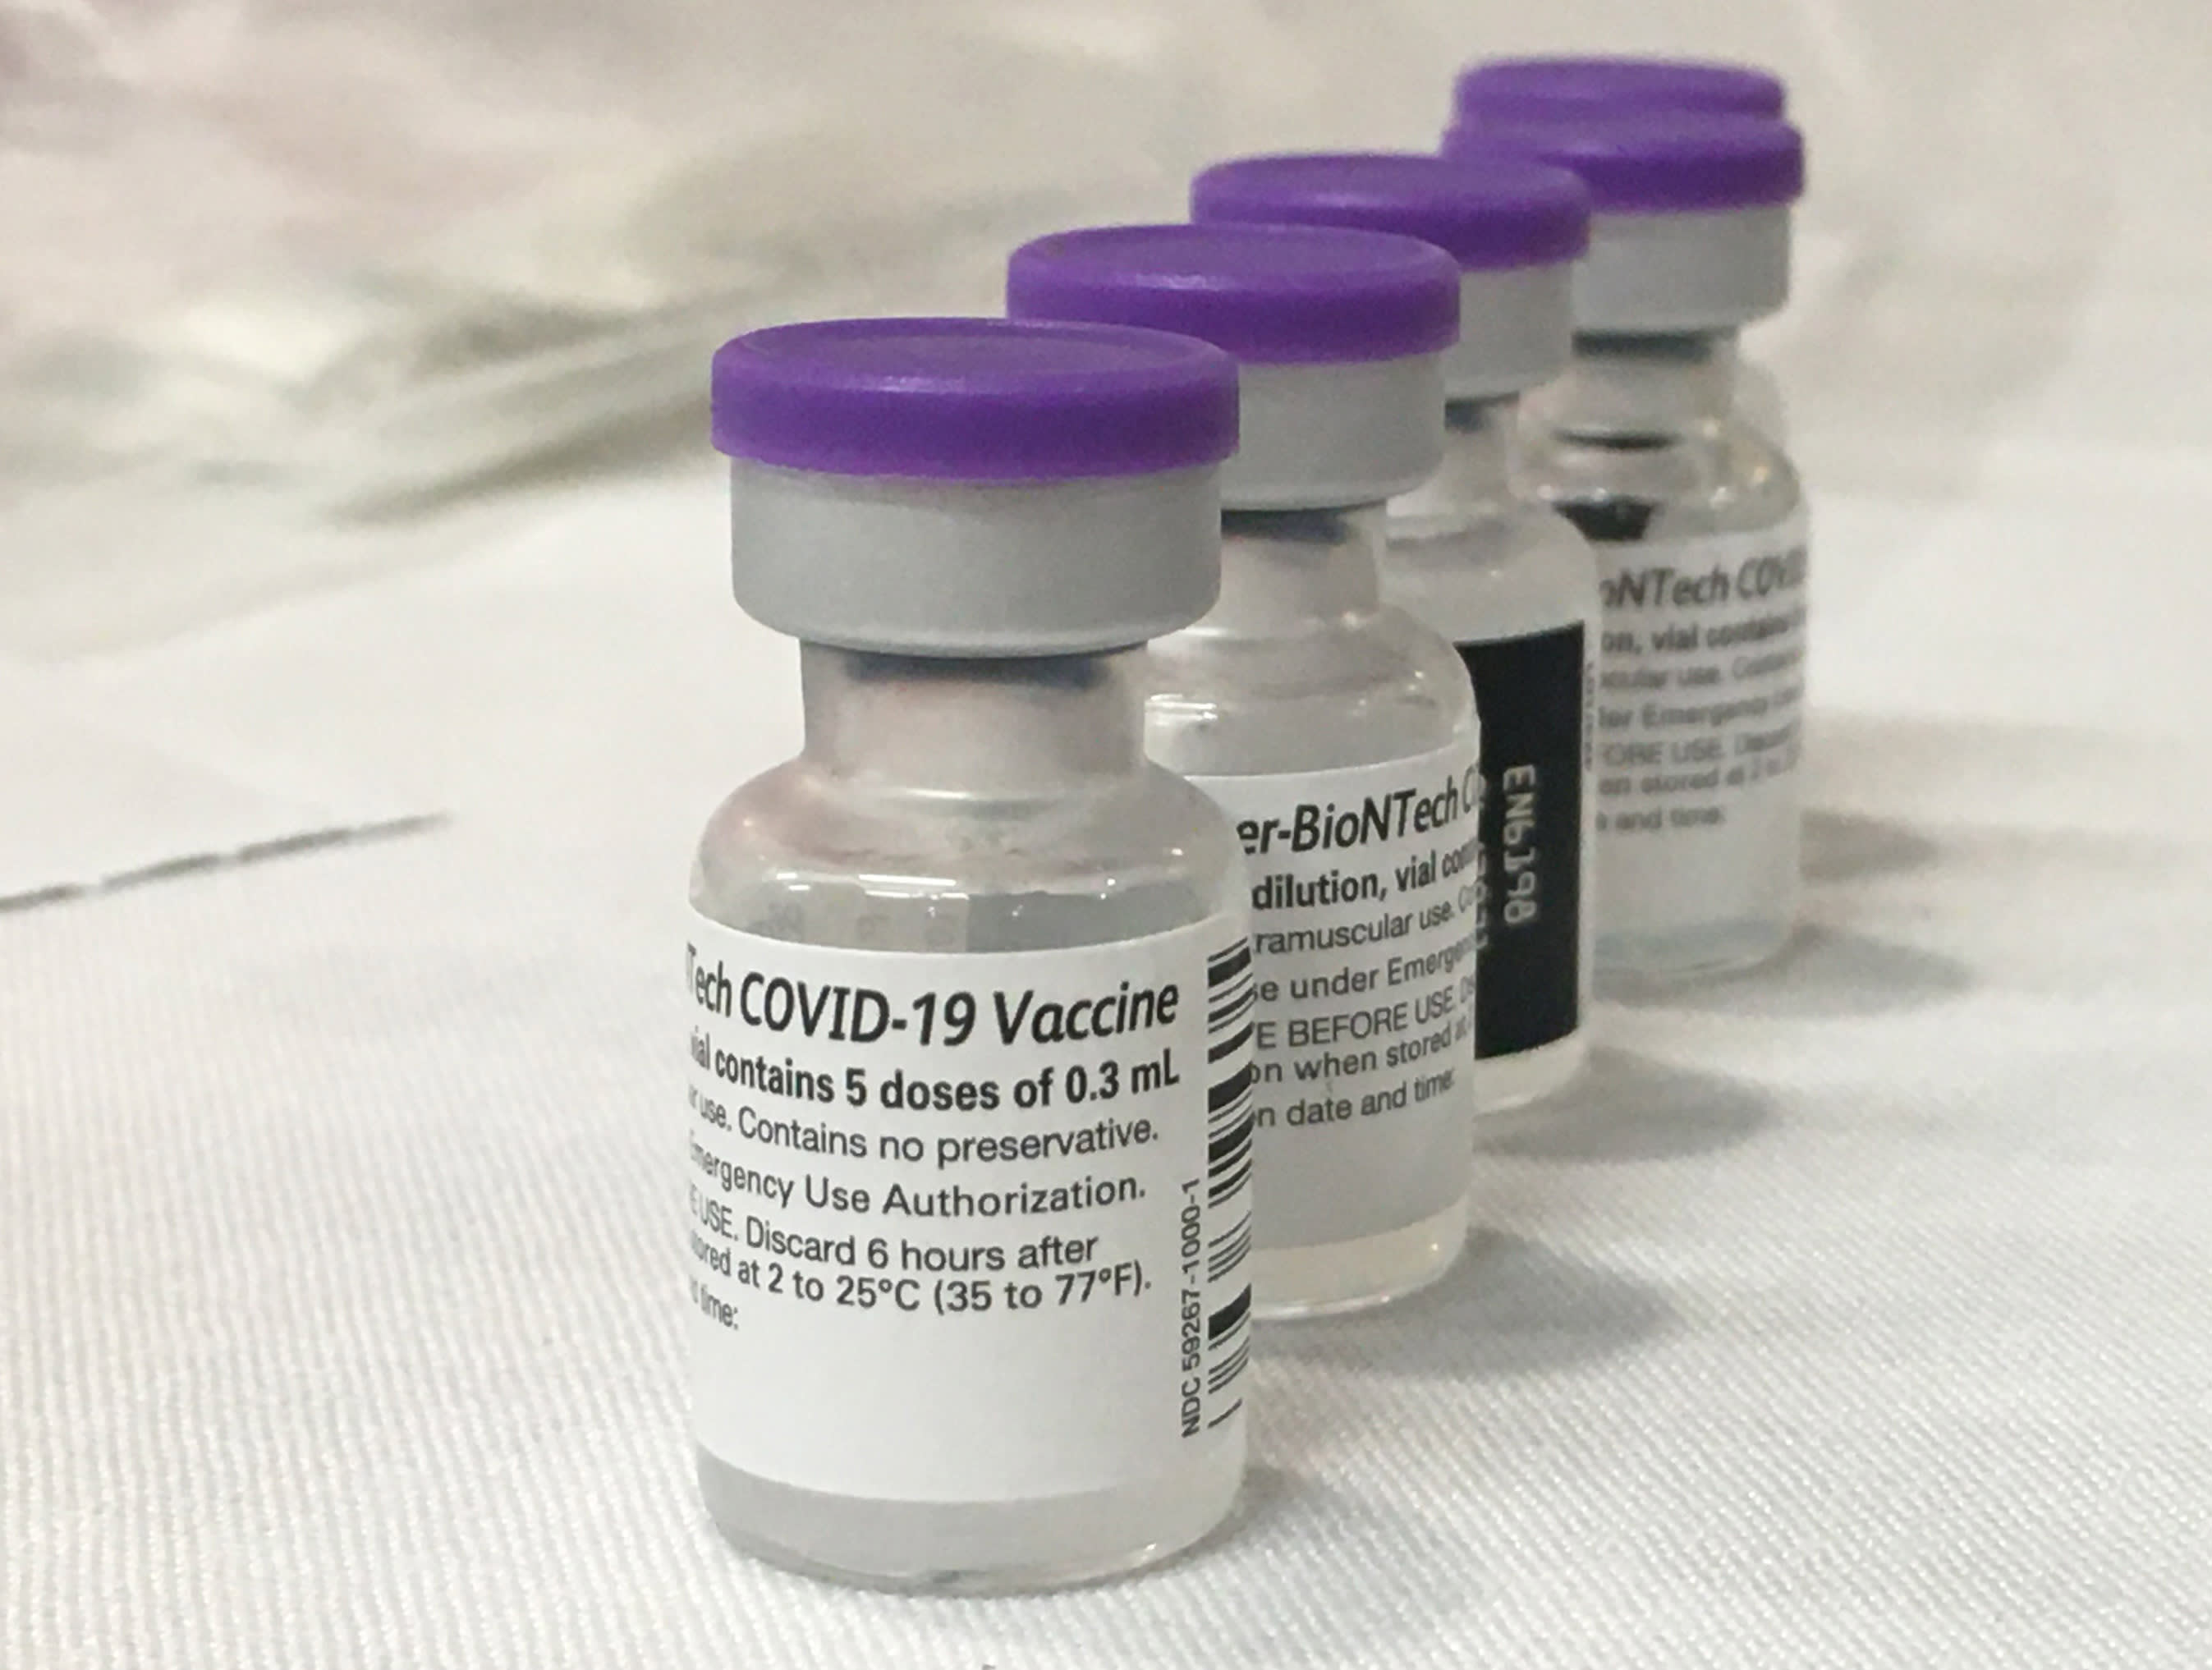 Convincing skittish parents to vaccinate their children will be key to curbing Covid, says Dr. Hotez - CNBC